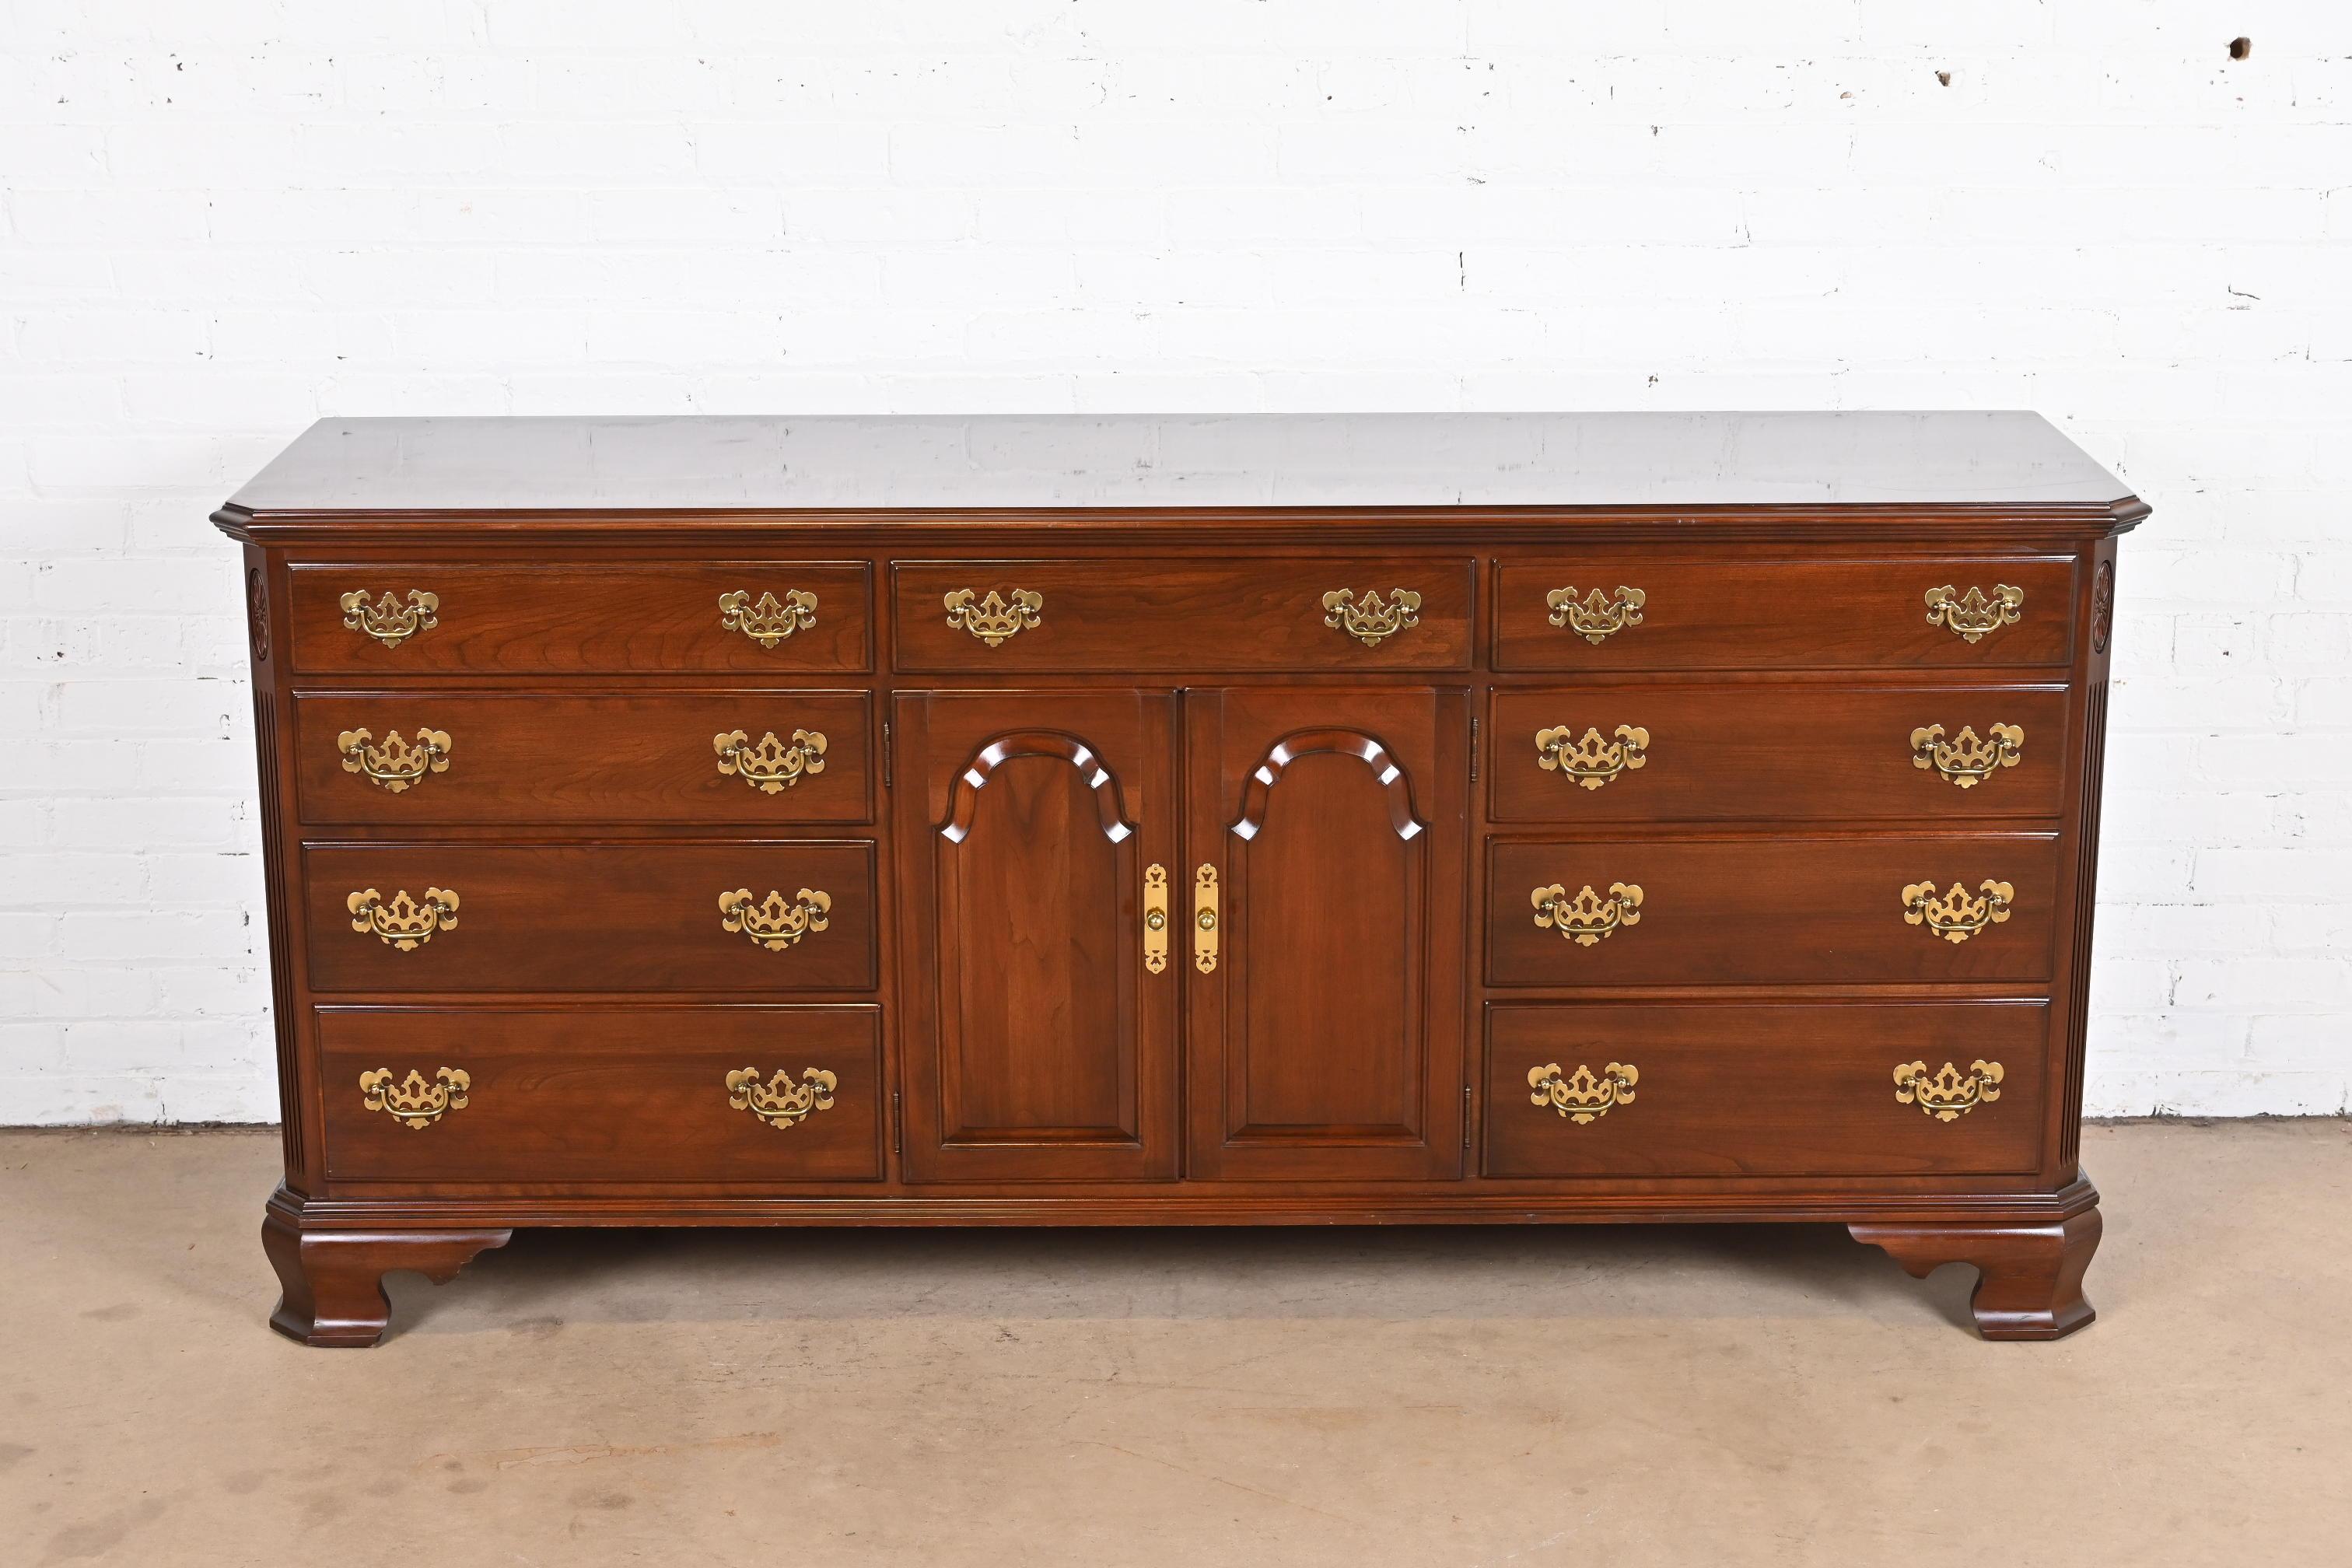 A gorgeous Georgian or Chippendale style eleven-drawer dresser or credenza

By Ethan Allen

USA, Circa 1980s

Carved solid cherry wood, with original brass hardware.

Measures: 74